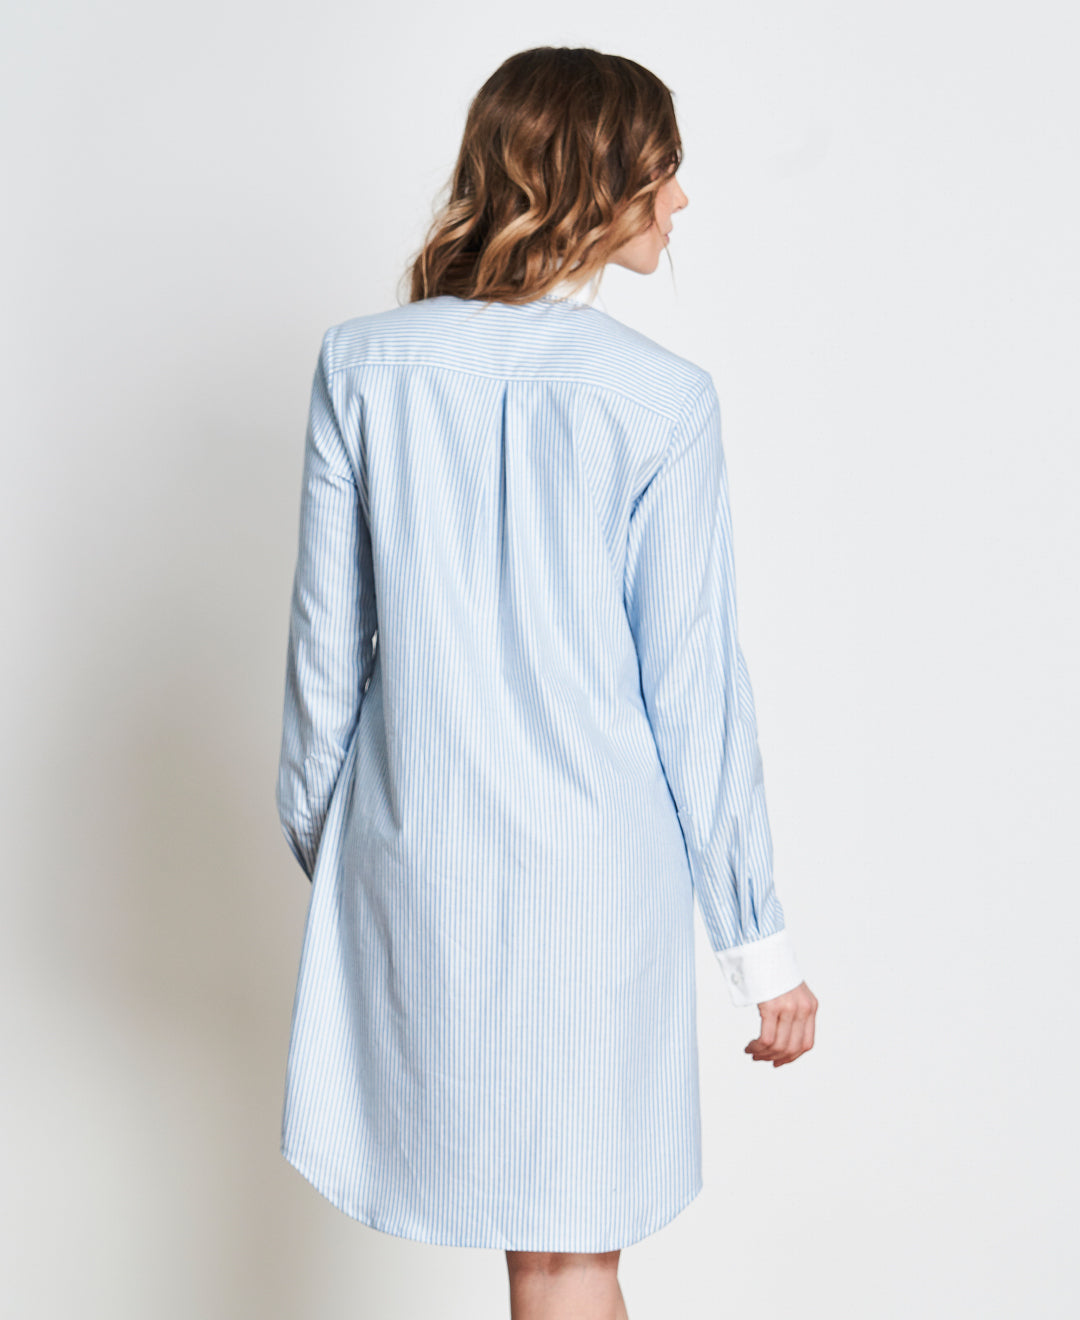 Blue pinstripes organic cotton shirt dress - Ethically made in Canada